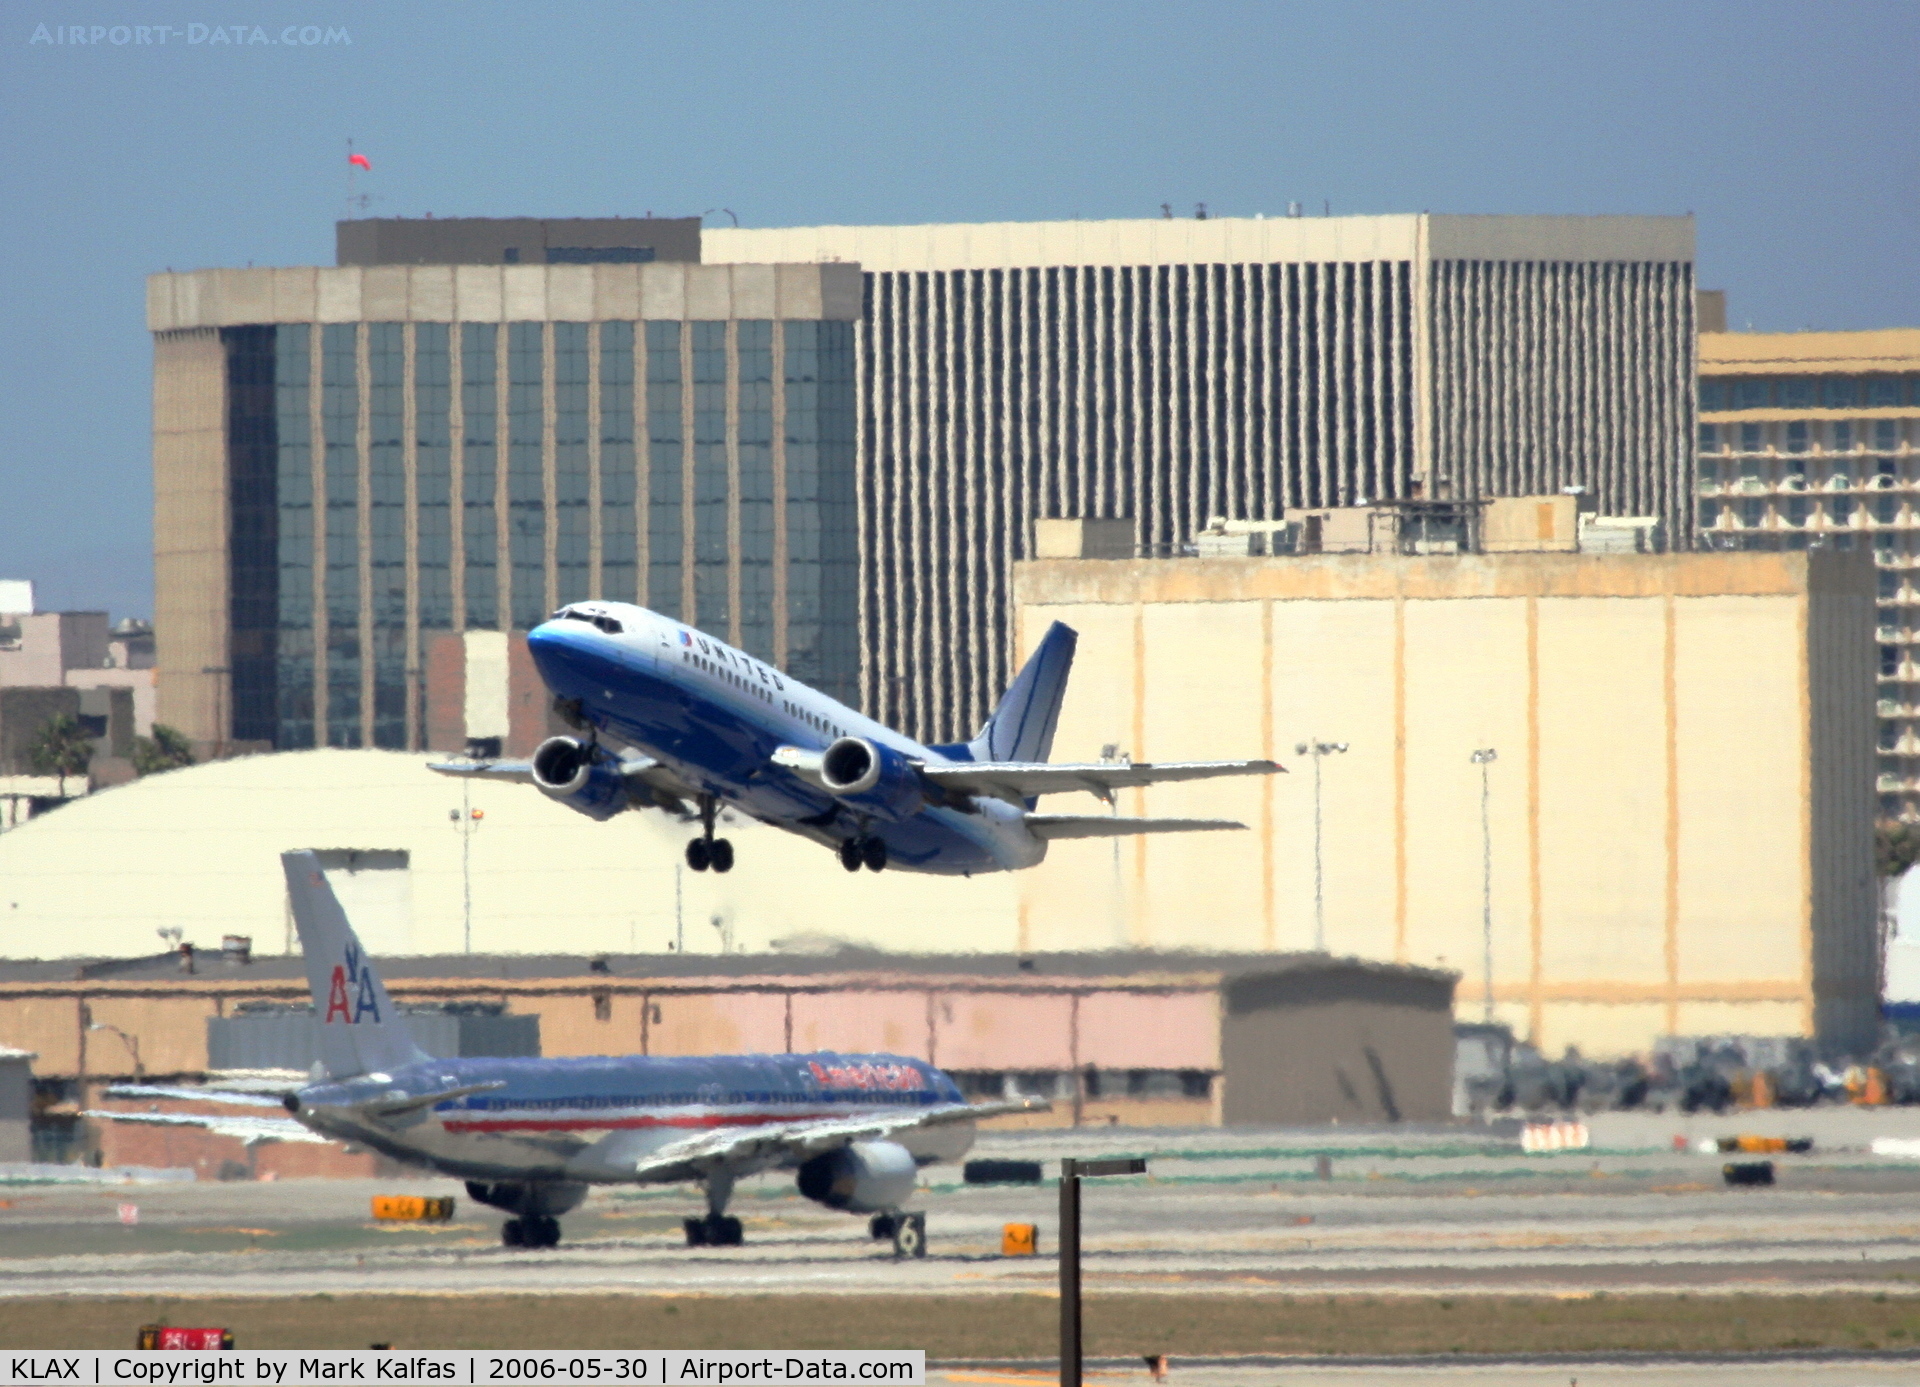 Los Angeles International Airport (LAX) - United Airlines 737-500 climbing out on 25R KLAX